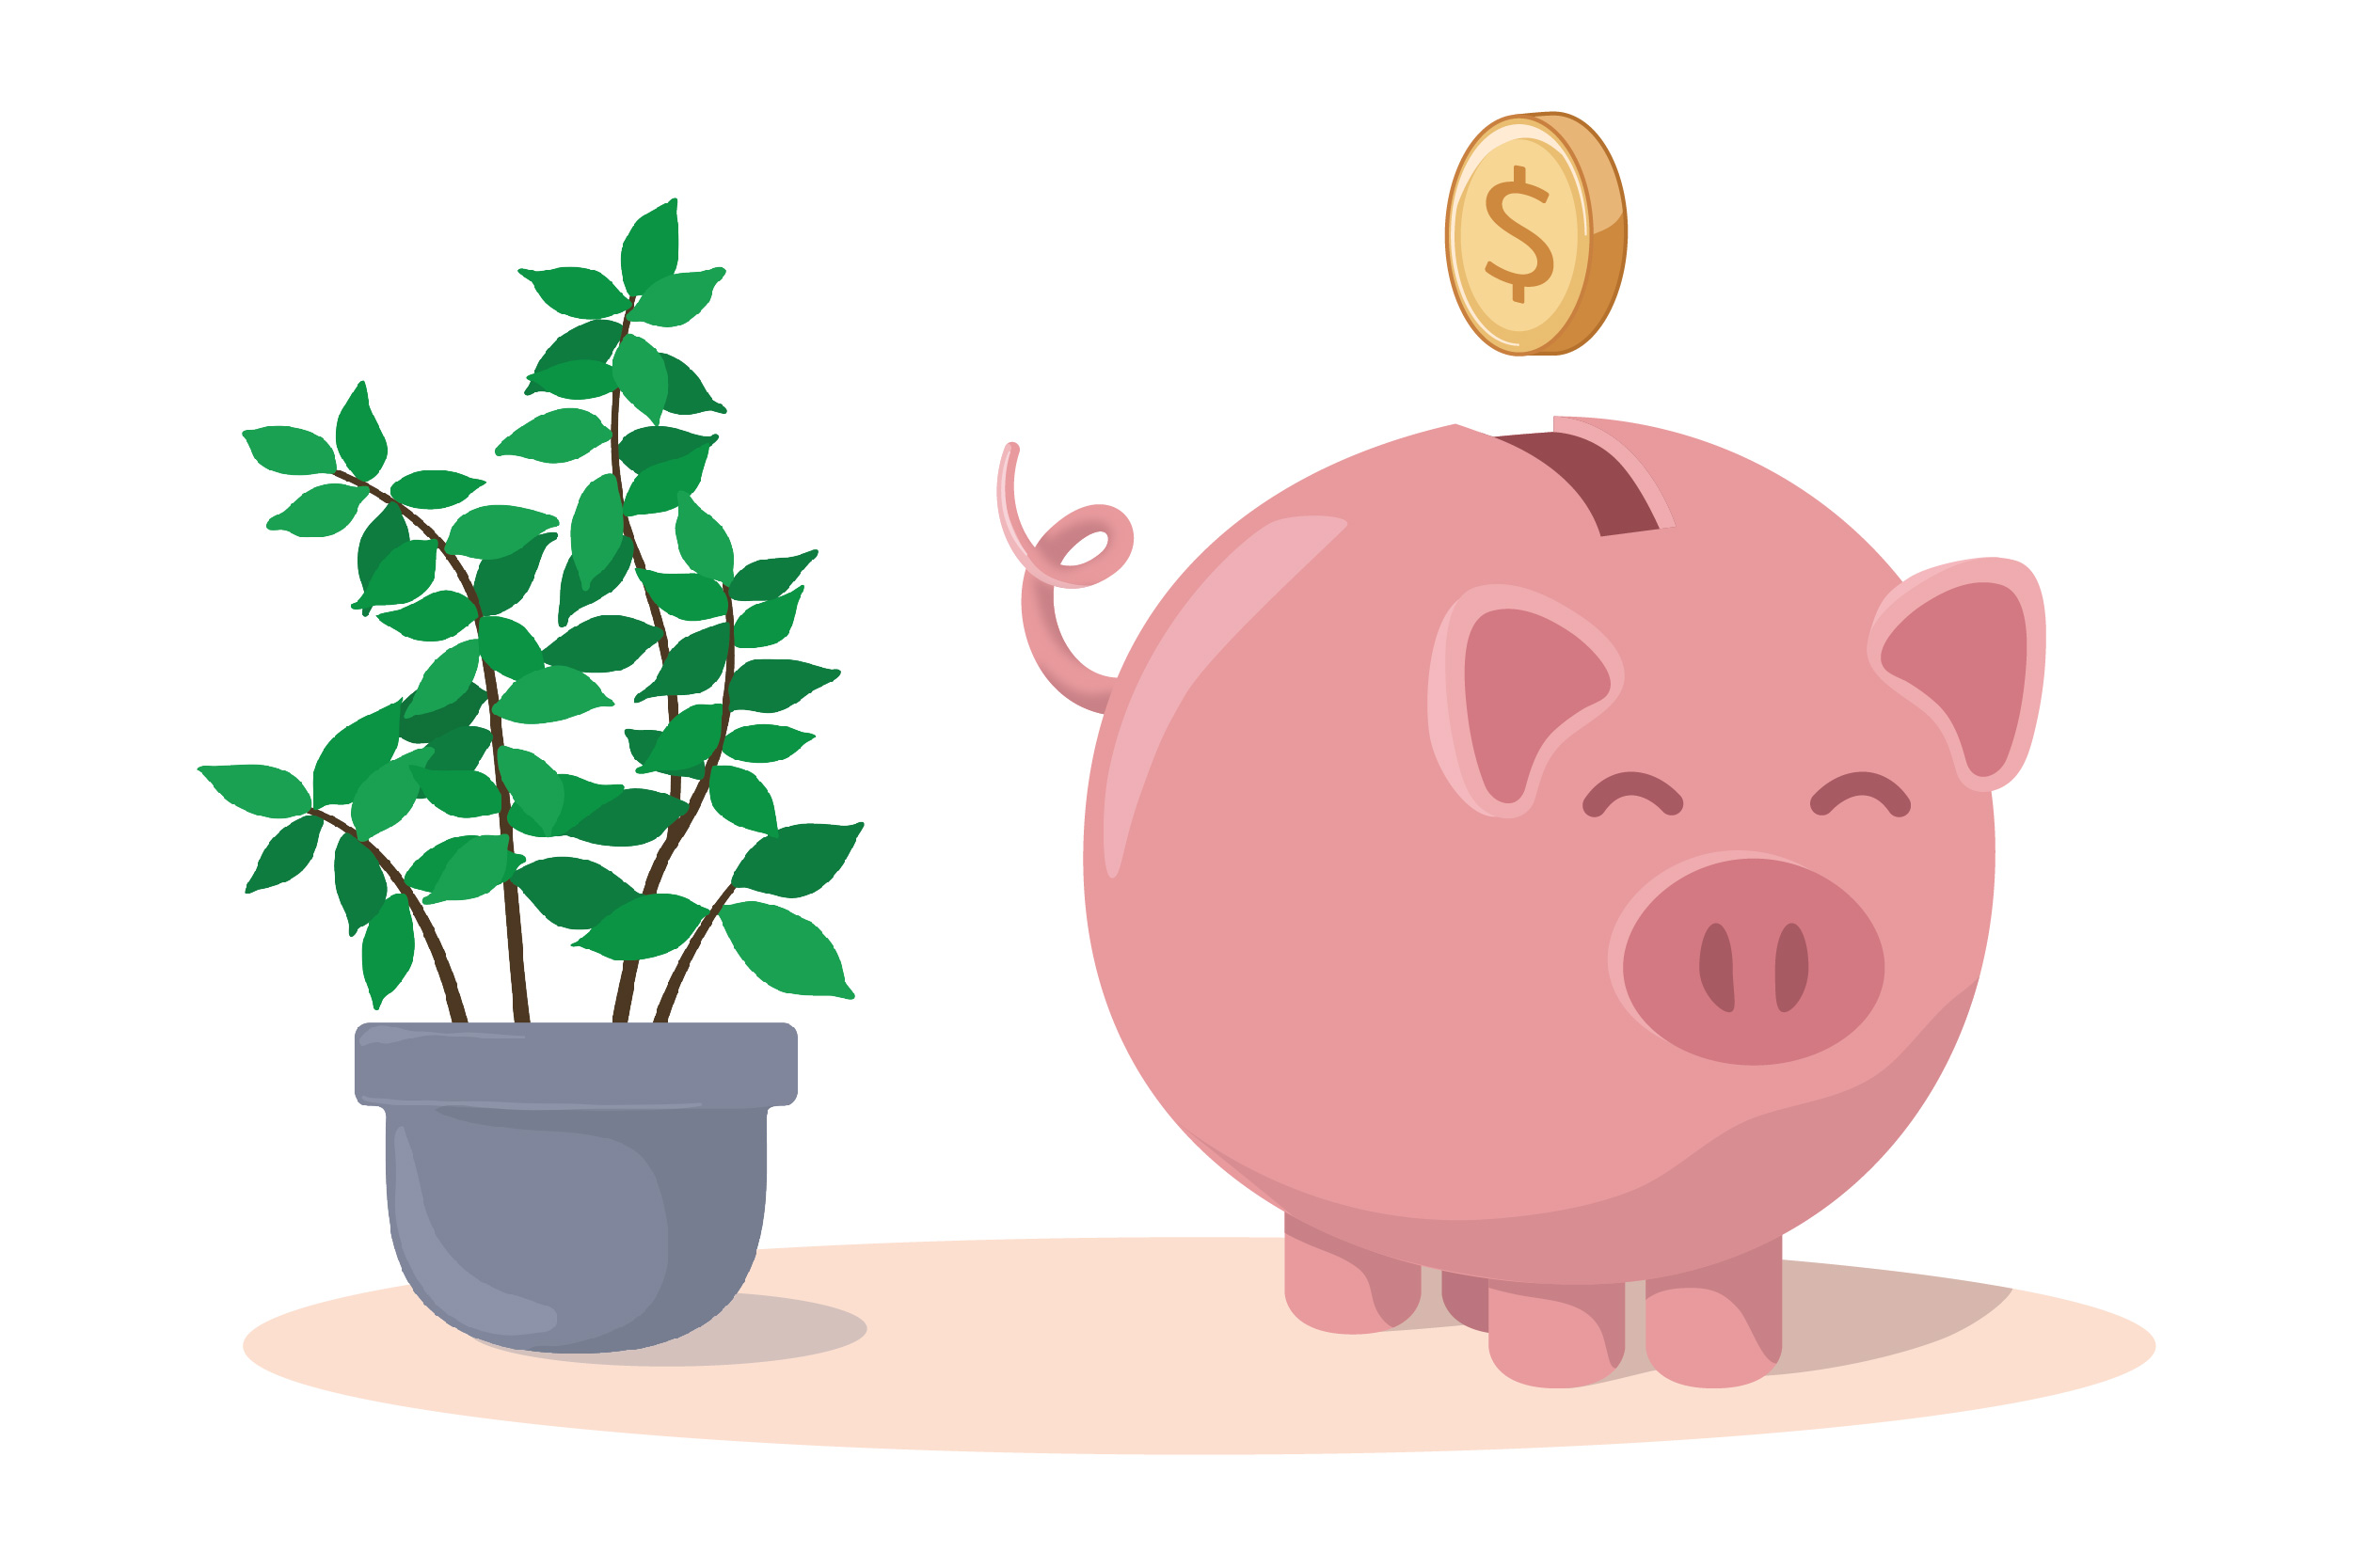 An illustrated piggy bank accepting a coin